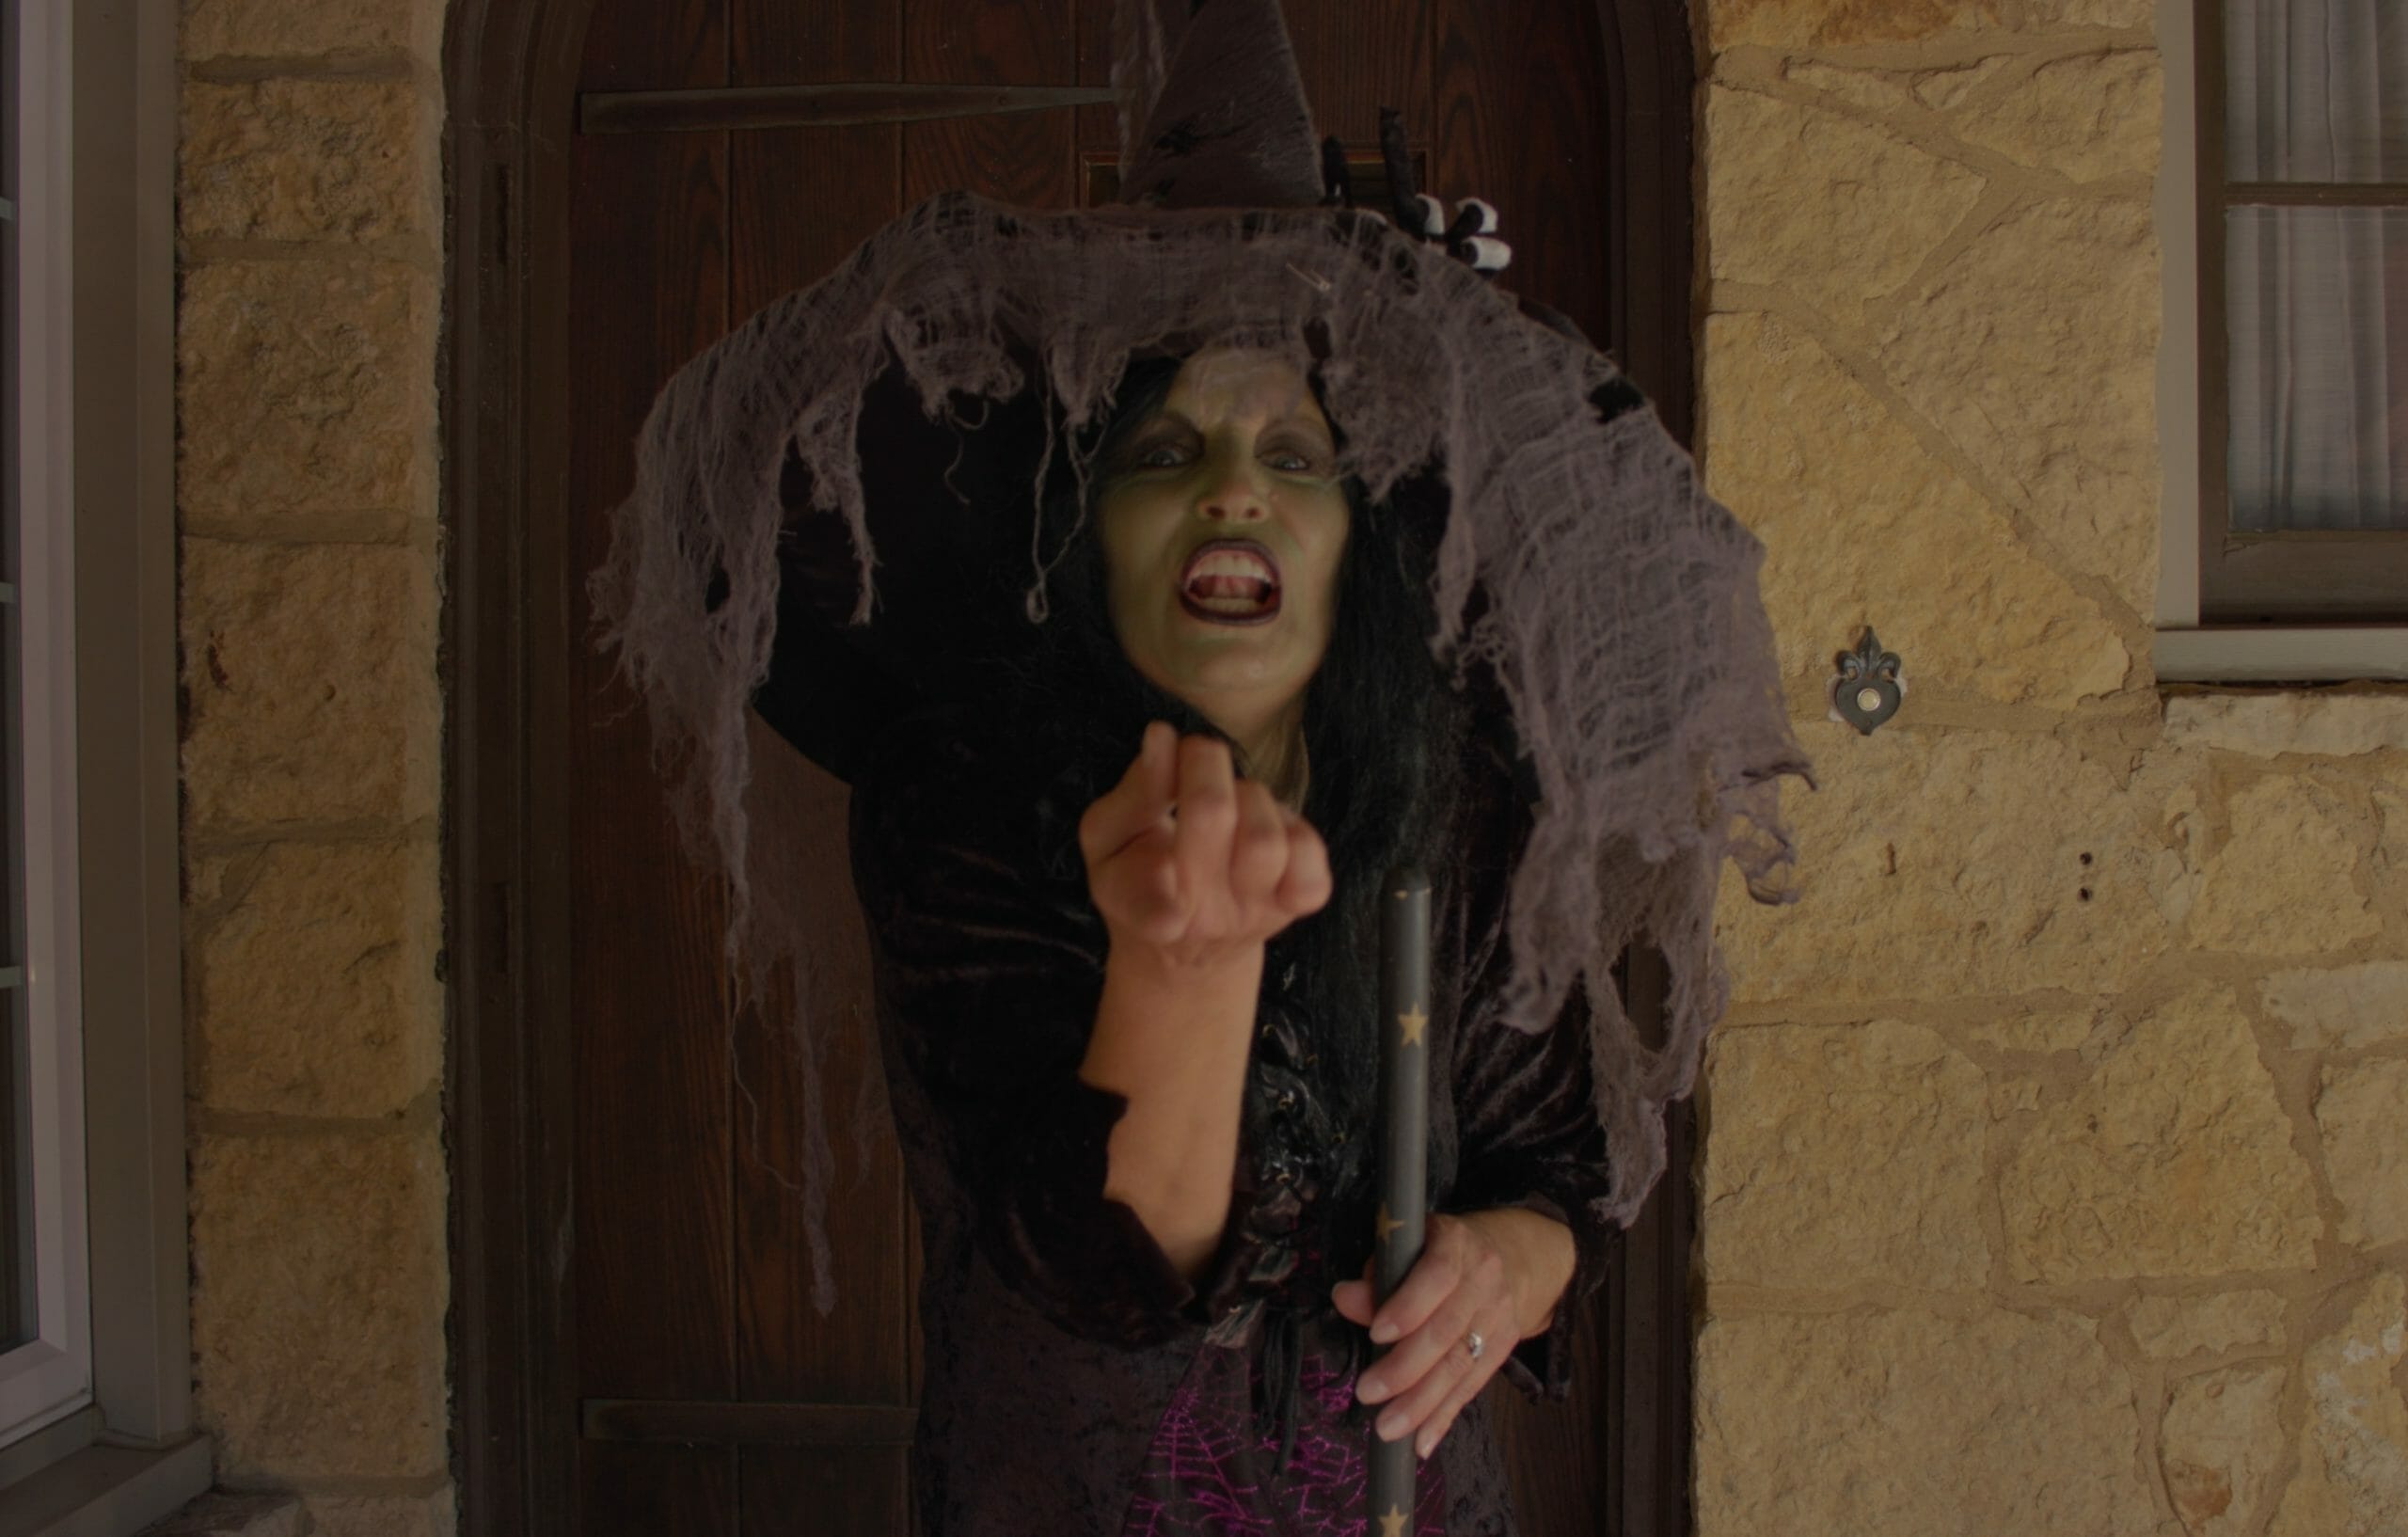 woman dressed as a witch beckoning you to come near